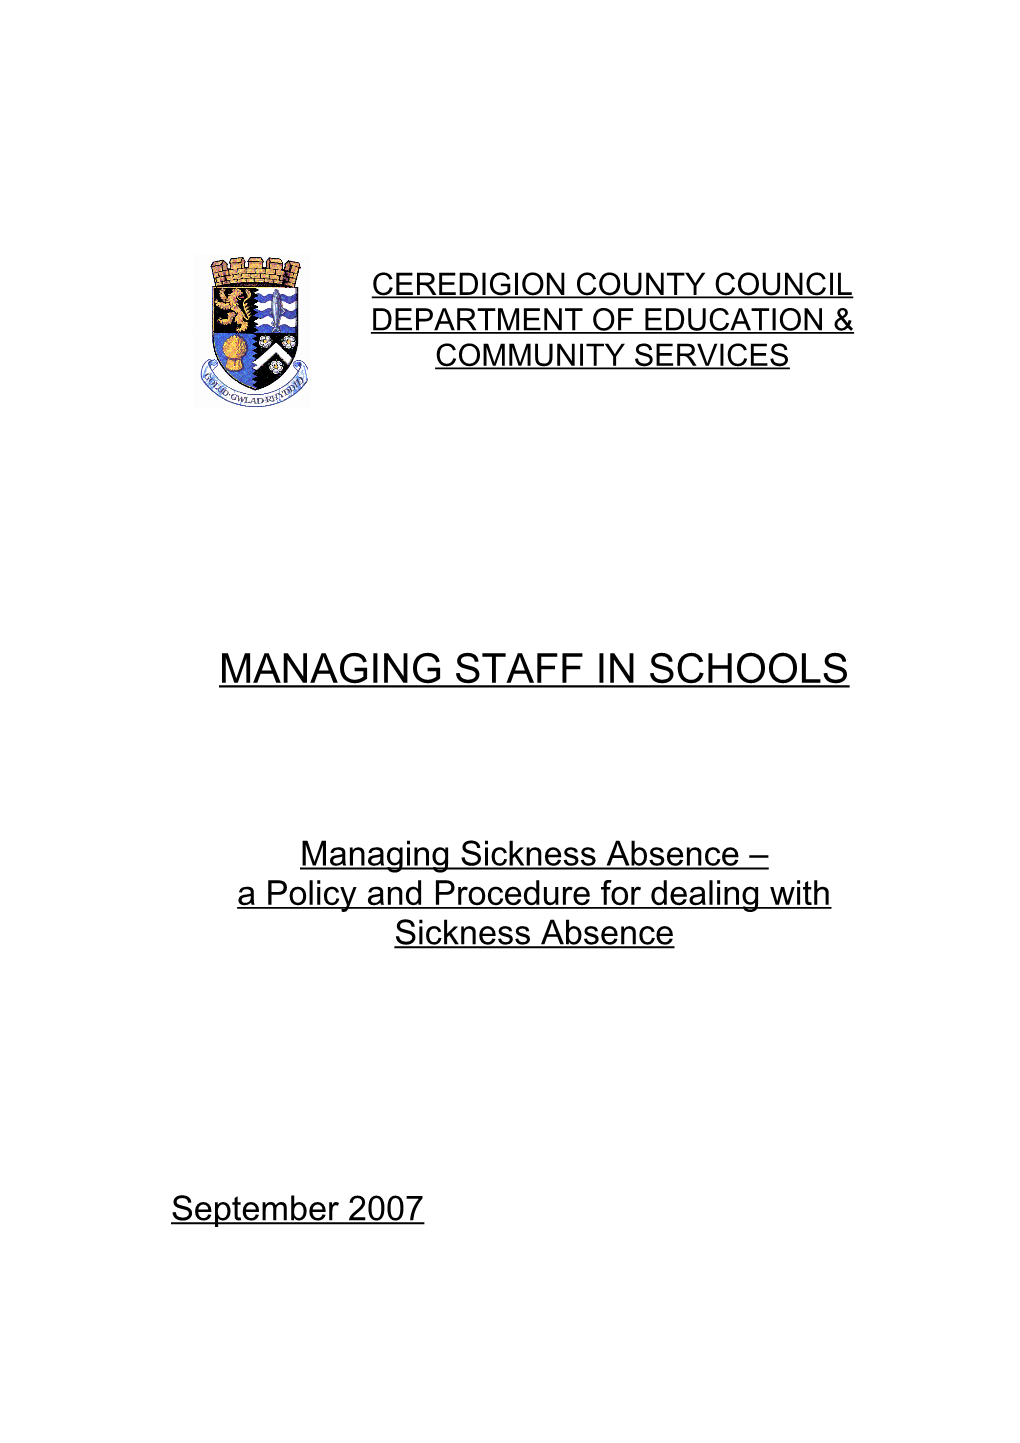 Department of Education & Community Services